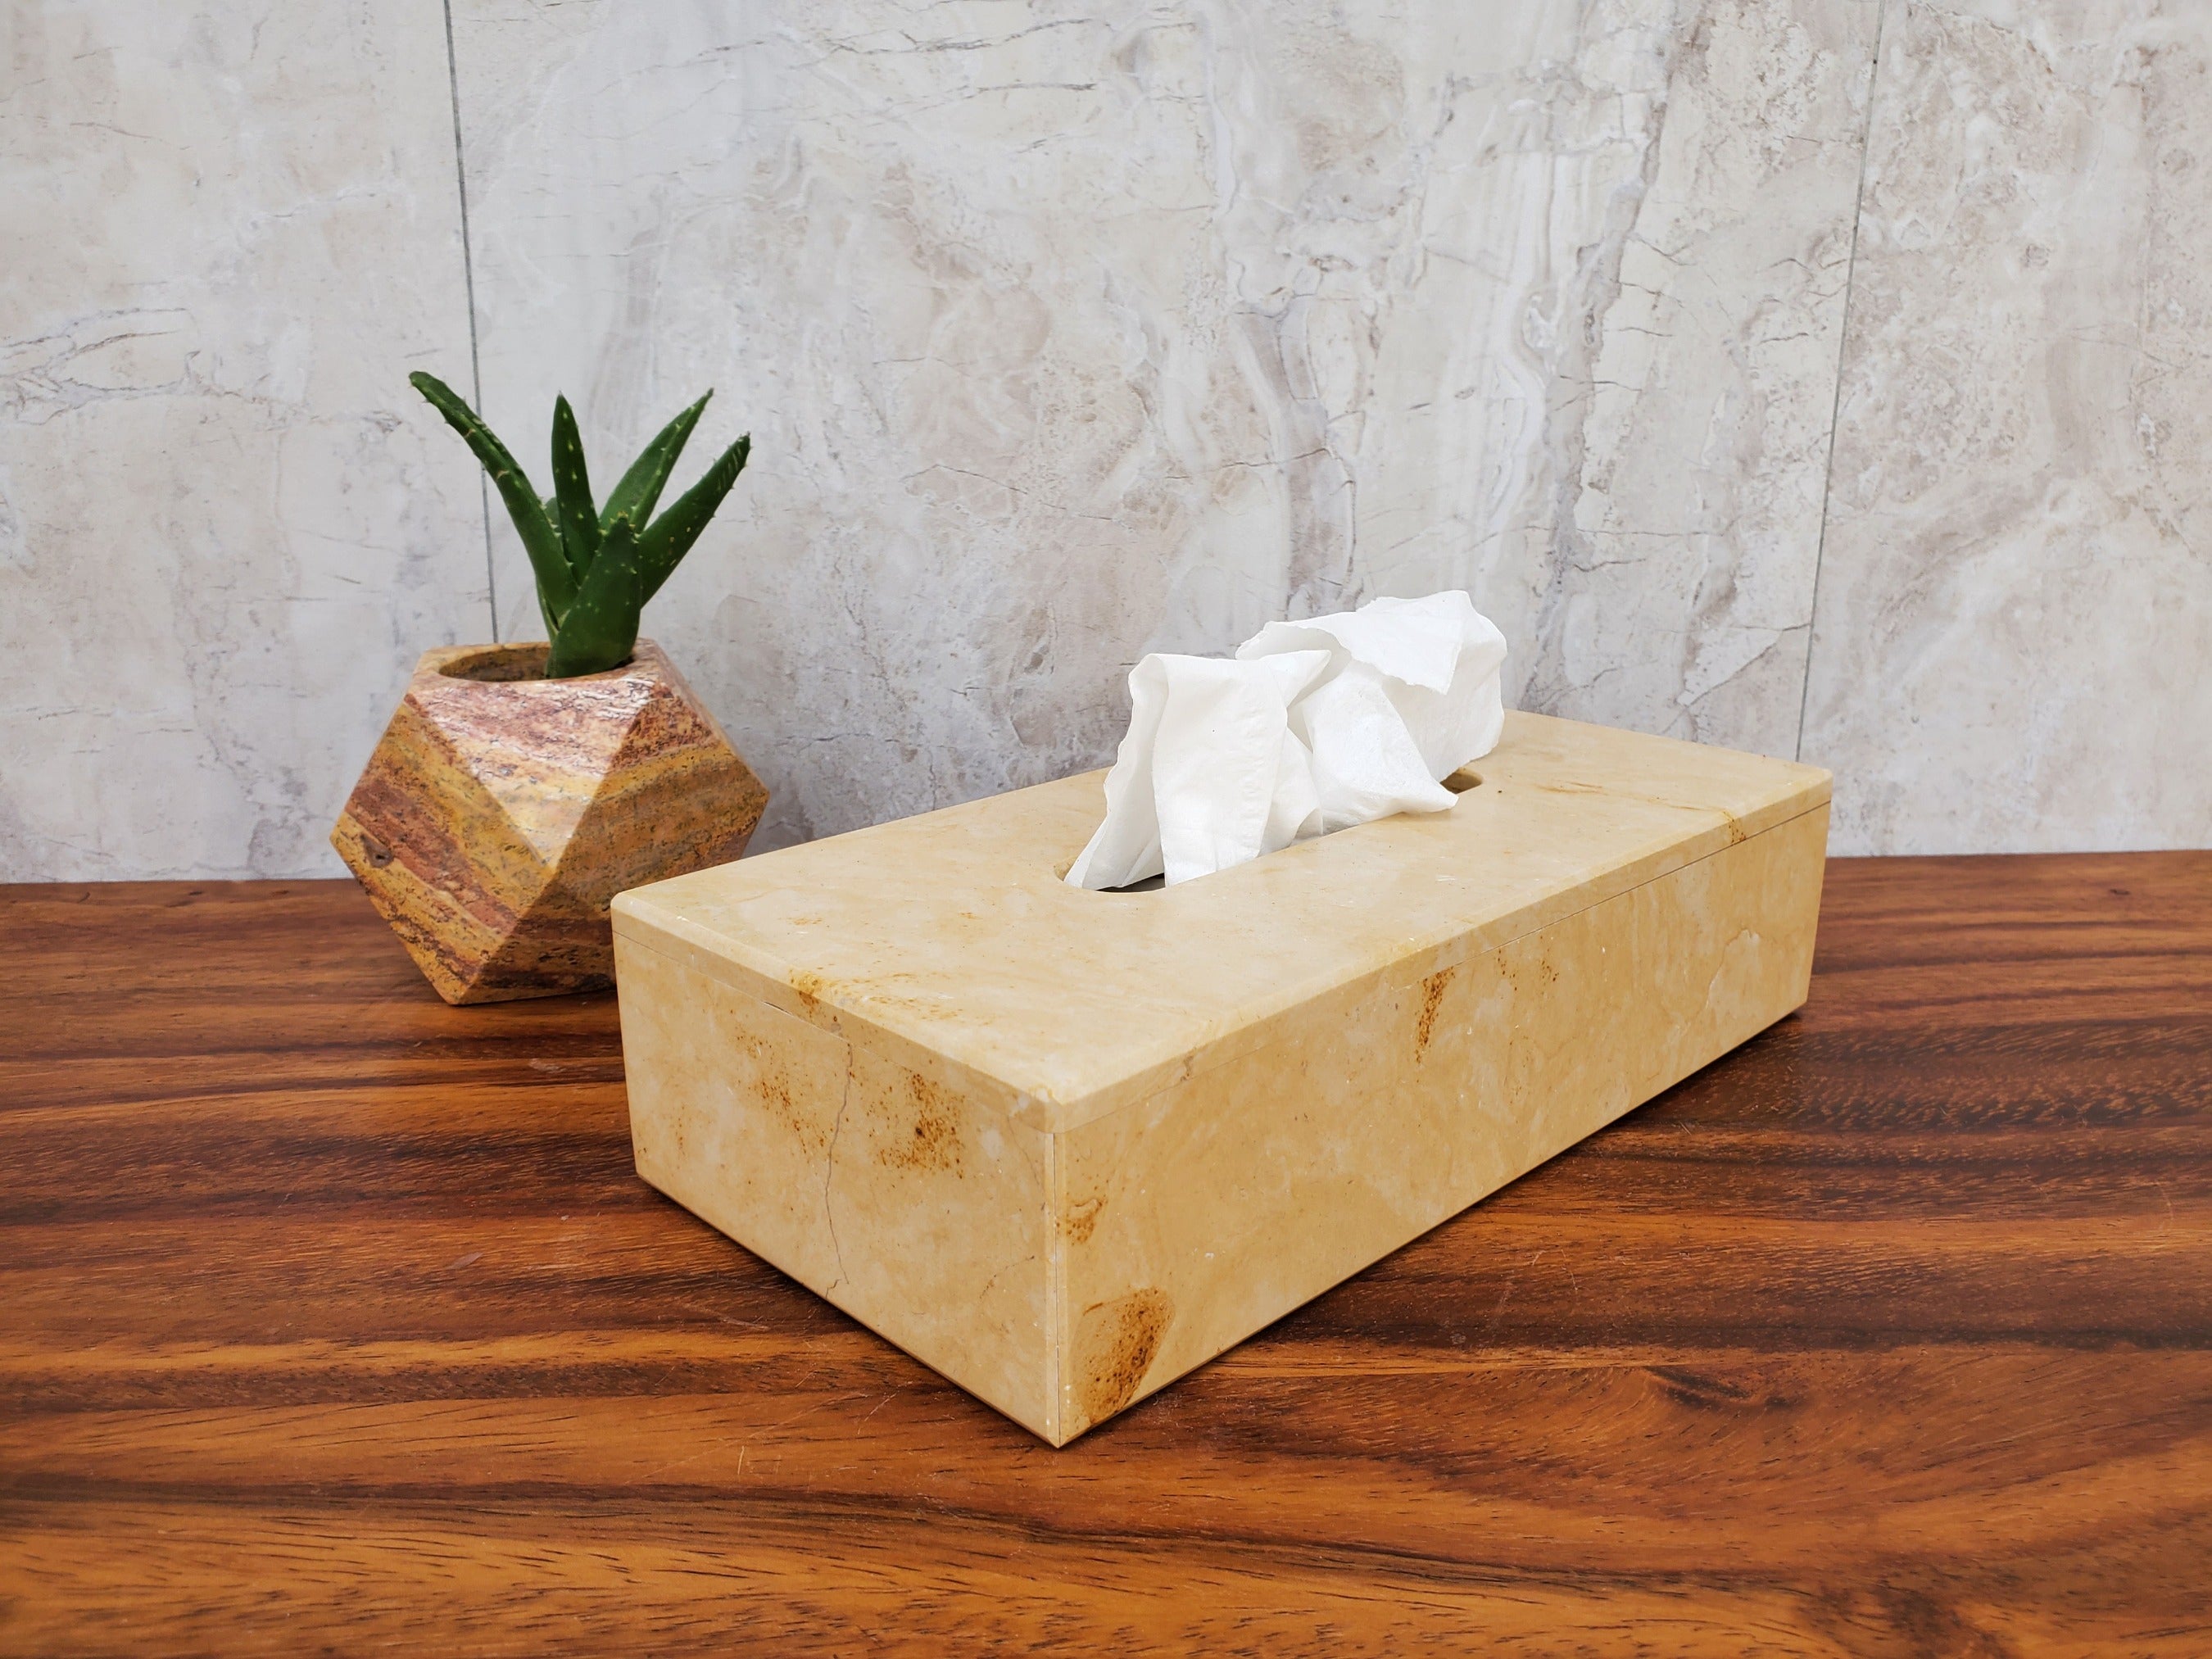 Mocha Brown Marble Rectangle Tissue Box Cover. Handmade in Mexico. Ships from the USA. Buy now at www.felipeandgrace.com. 